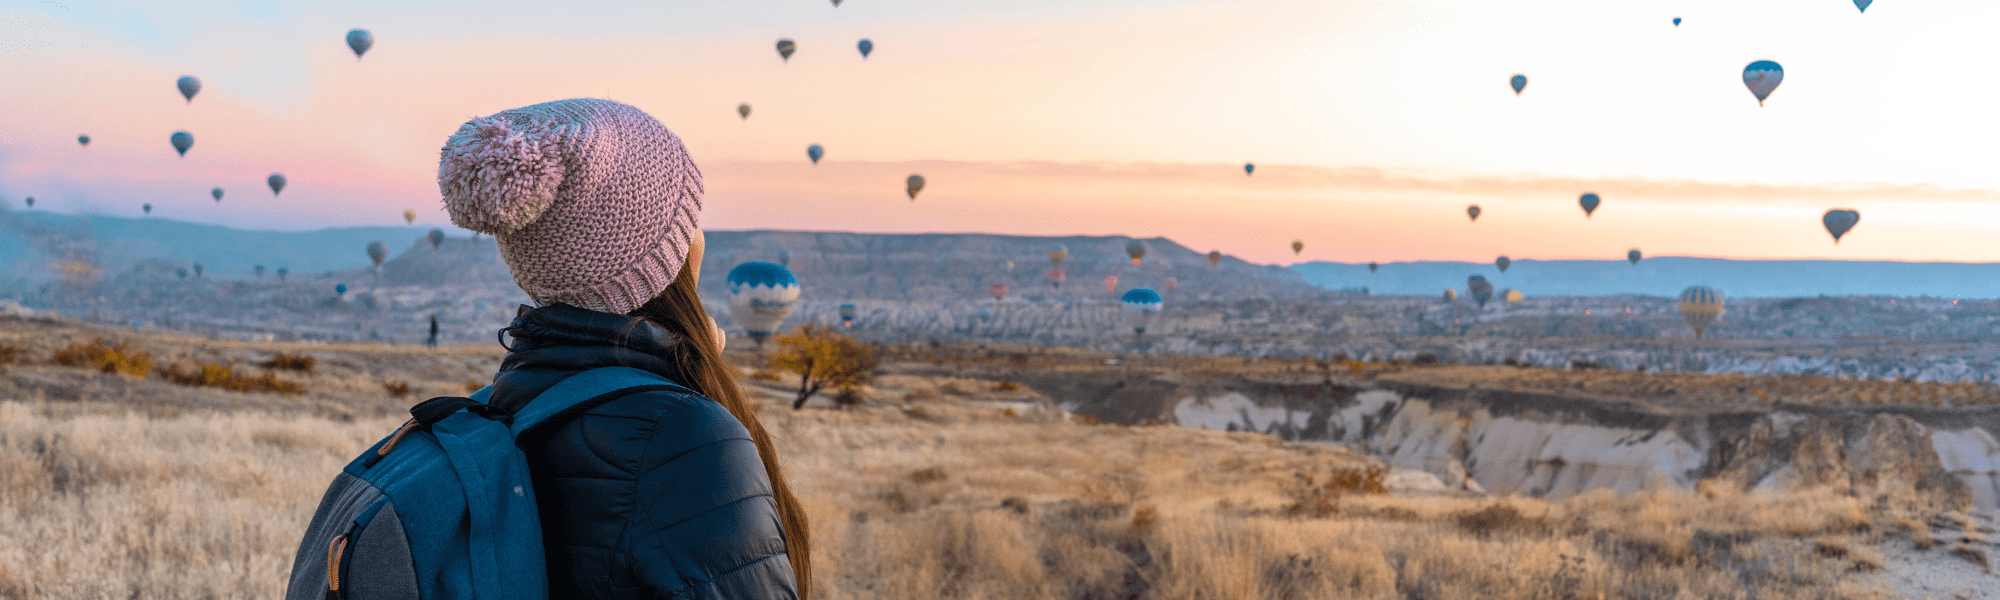 woman in a field observing hot air balloons 